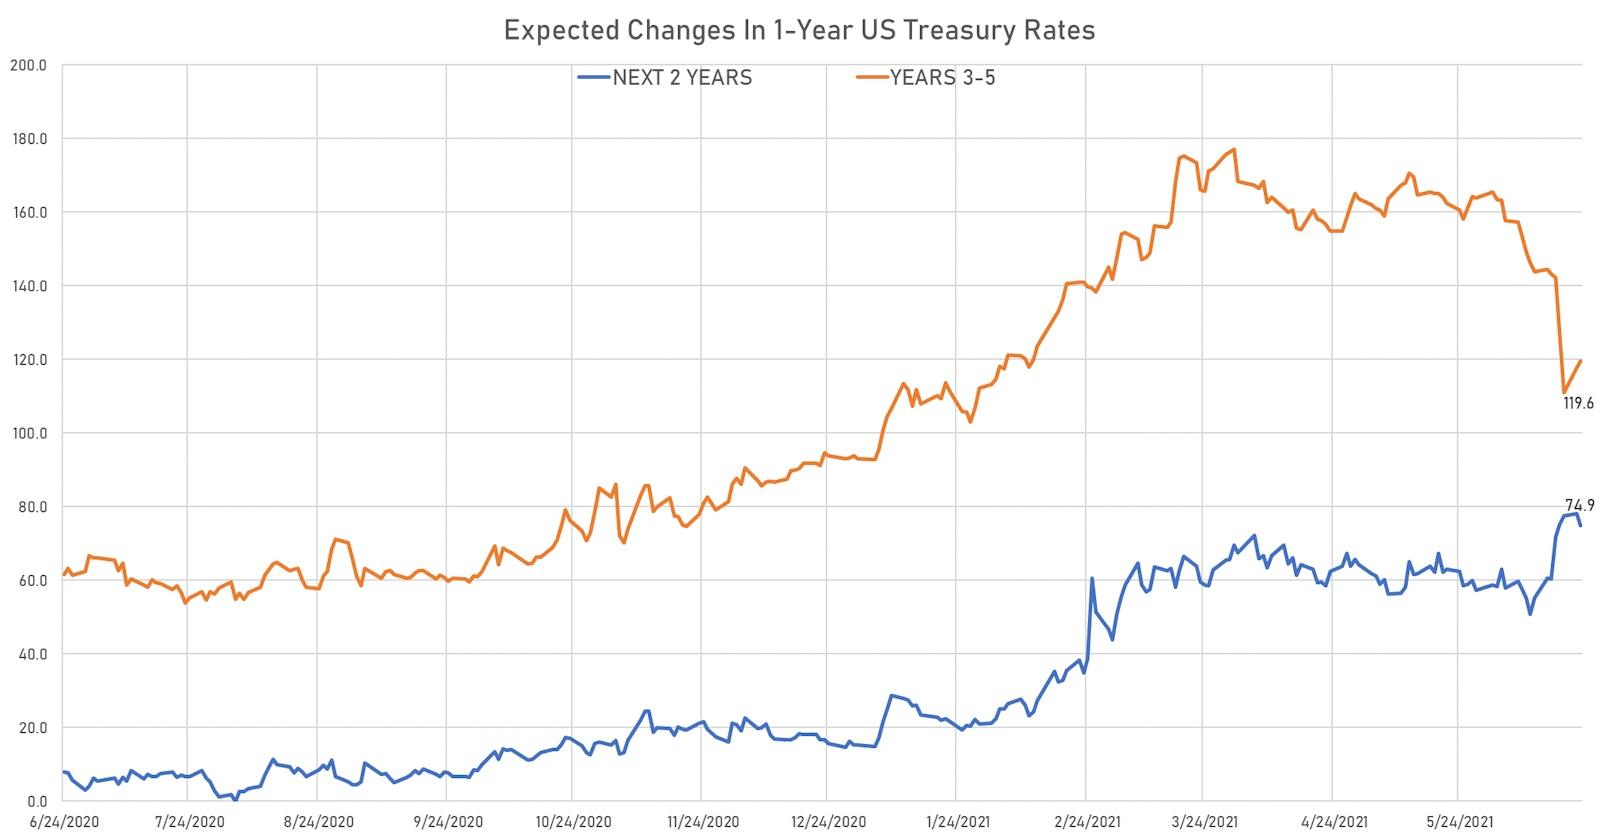 Changes in the 1-Year Zero Rate over the next 5 years | Sources: ϕpost, Refinitiv data